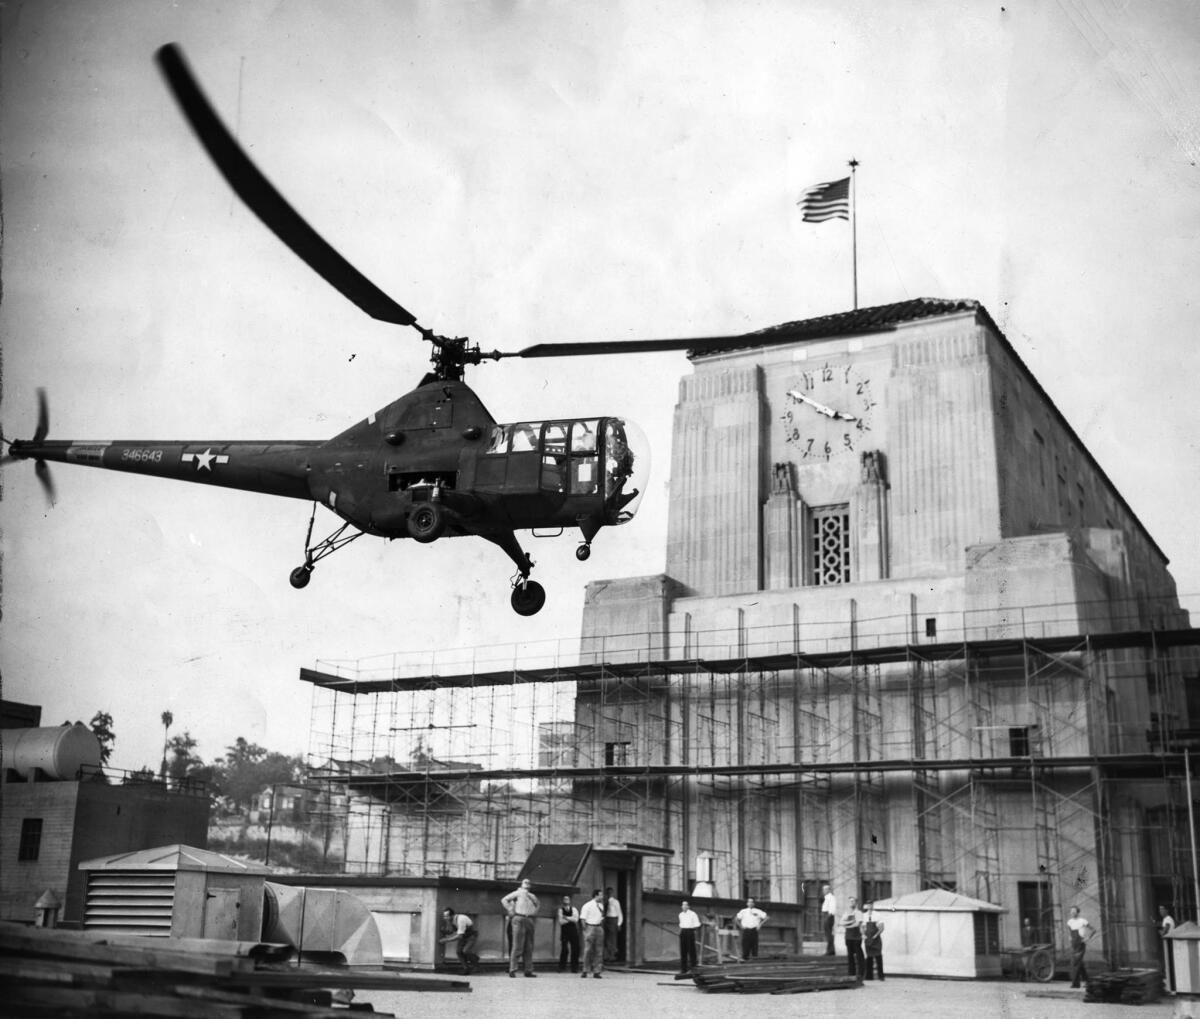 Oct. 26, 1946: A helicopter flown by Army pilot Lt. Edward H. Frost drops Coliseum football game negatives on the roof of the Los Angeles Times building. UCLA beat Santa Clara 33-7.